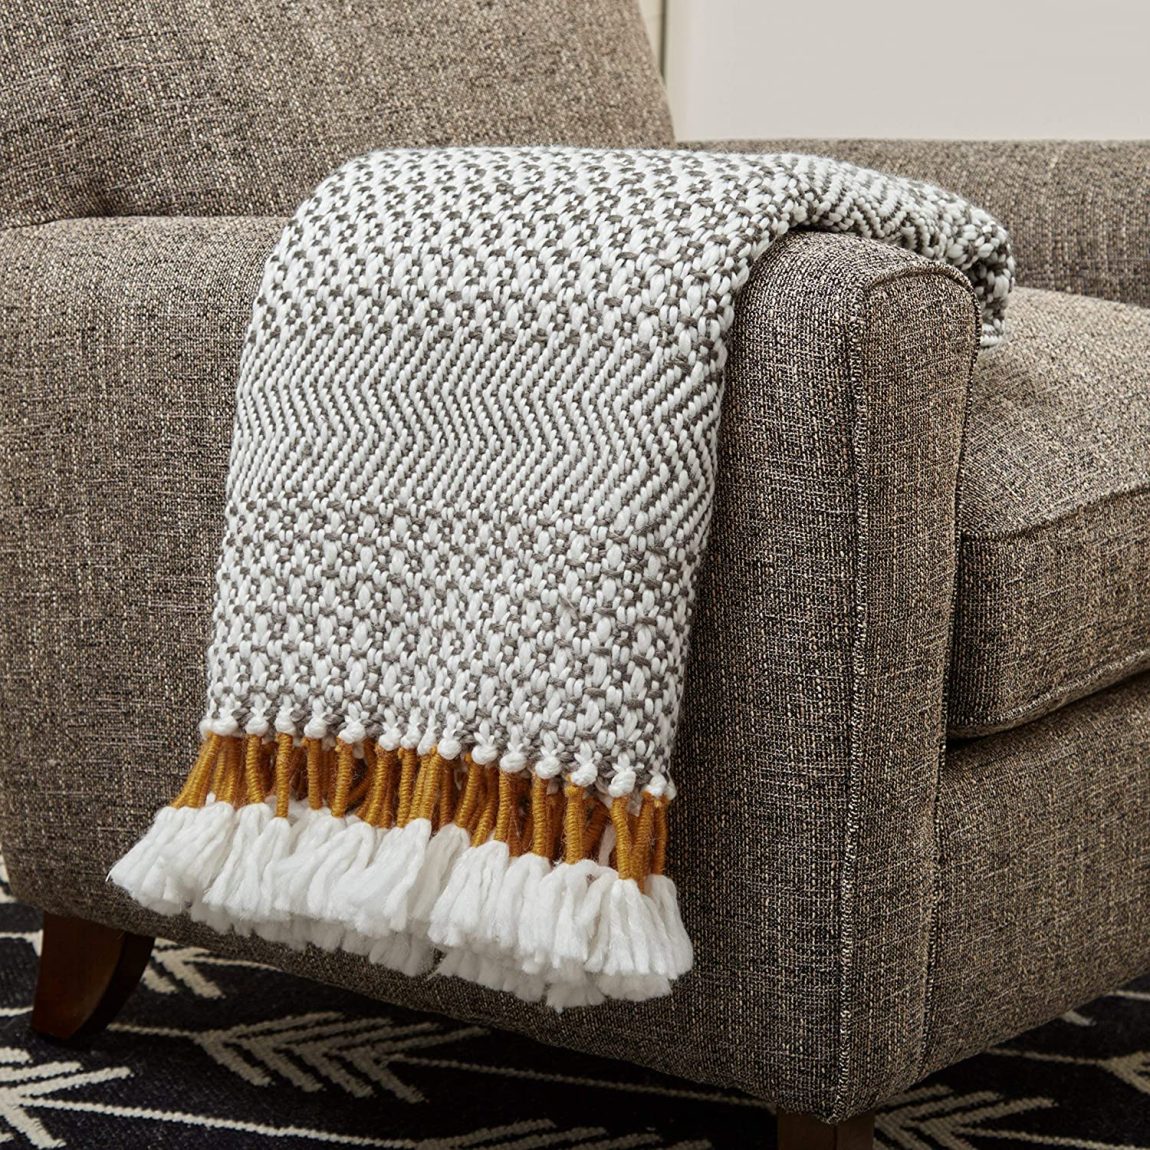 Where to find my favorite decorative throw blankets for your home. Shop beautiful and cozy blankets to snuggle up with, no matter what the season. I've got decorative throws for every style. 